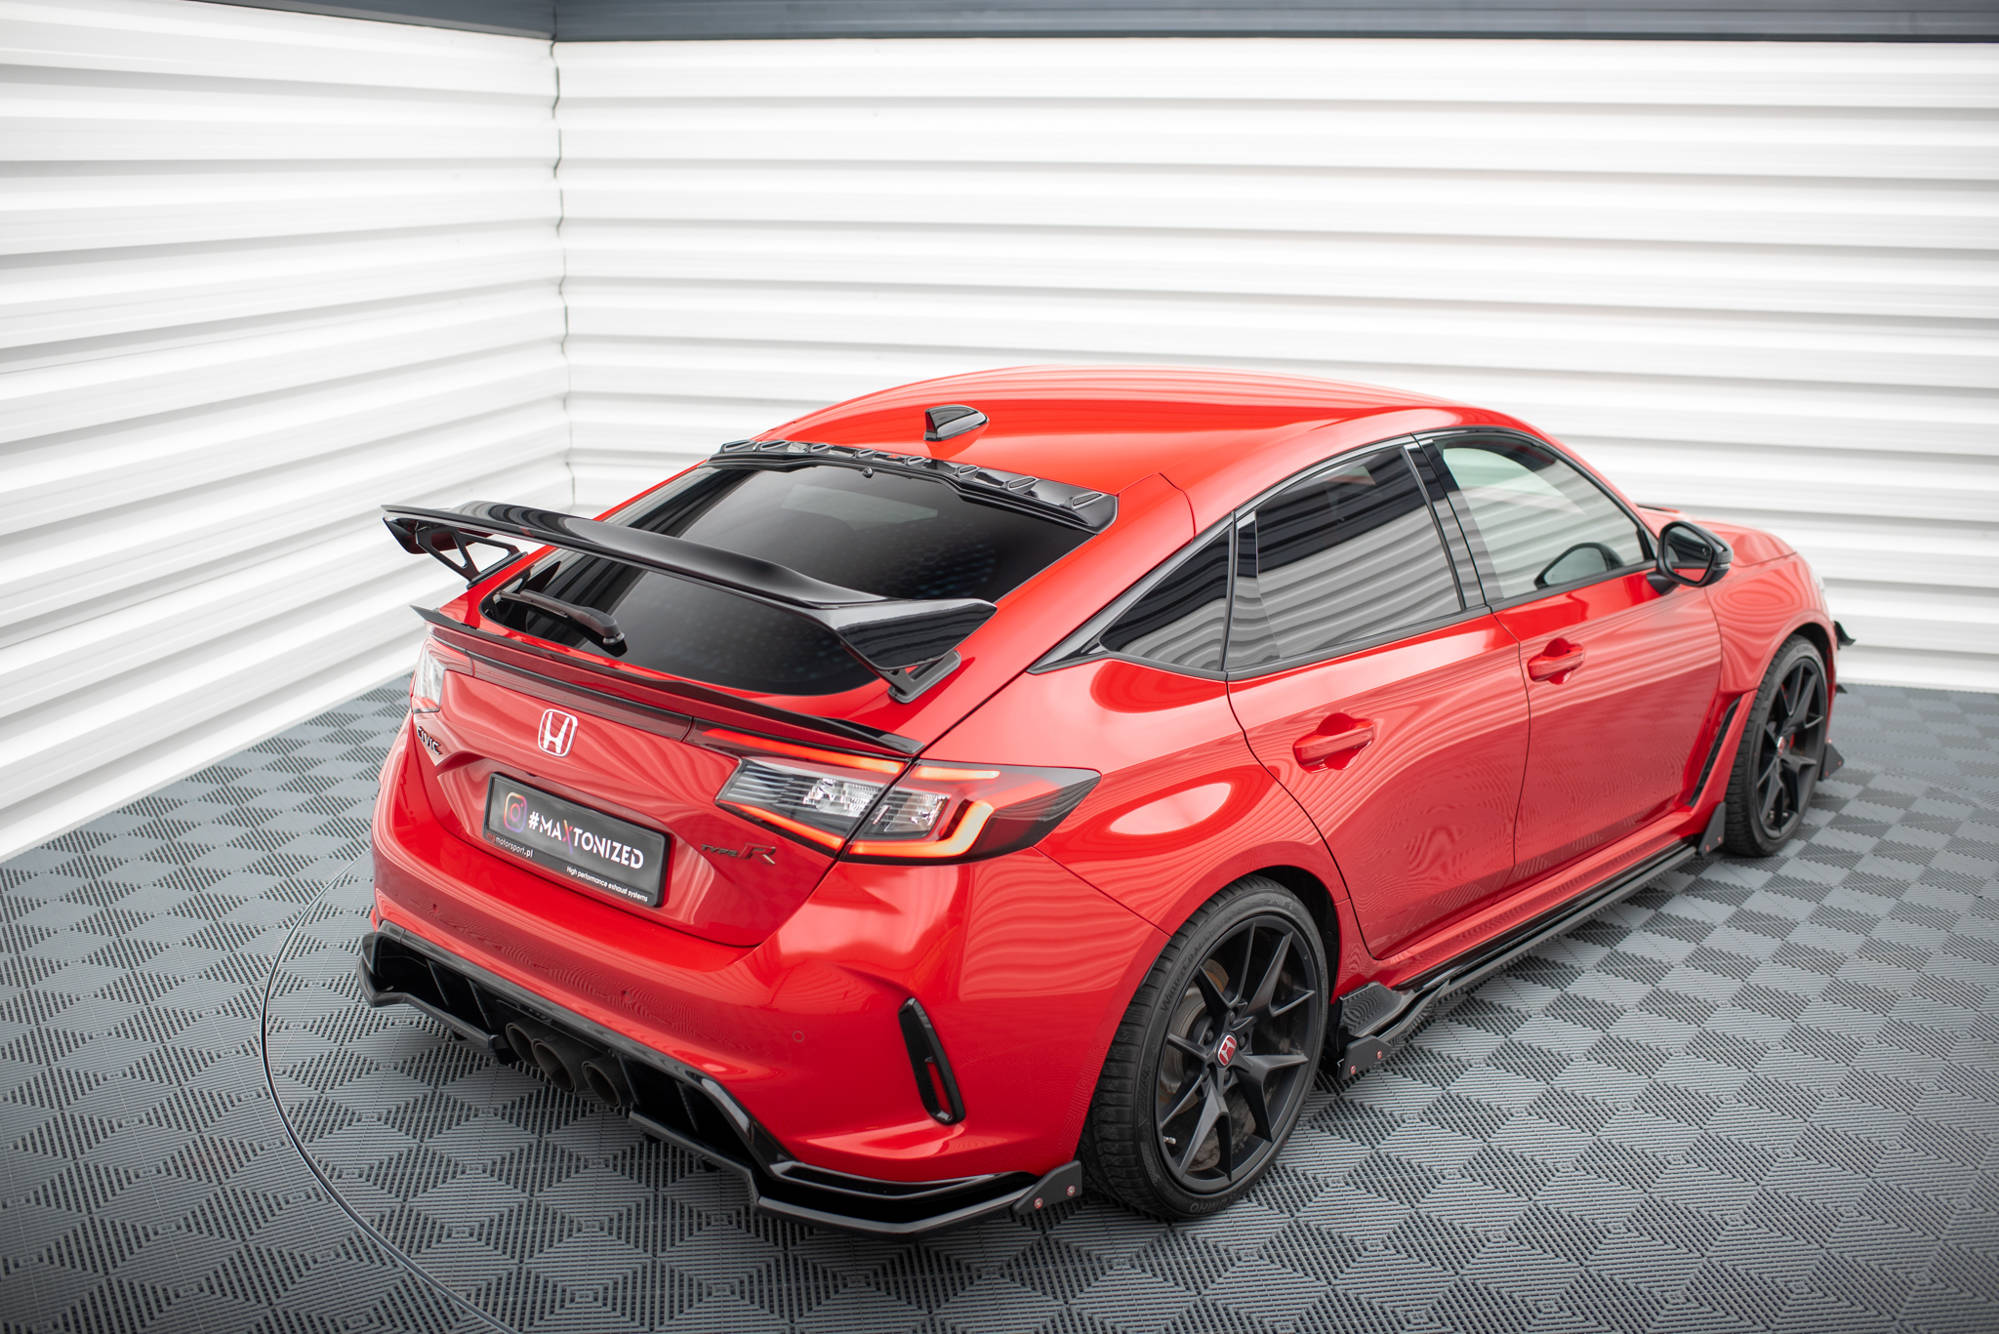 The extension of the rear window Honda Civic Type-R Mk 11